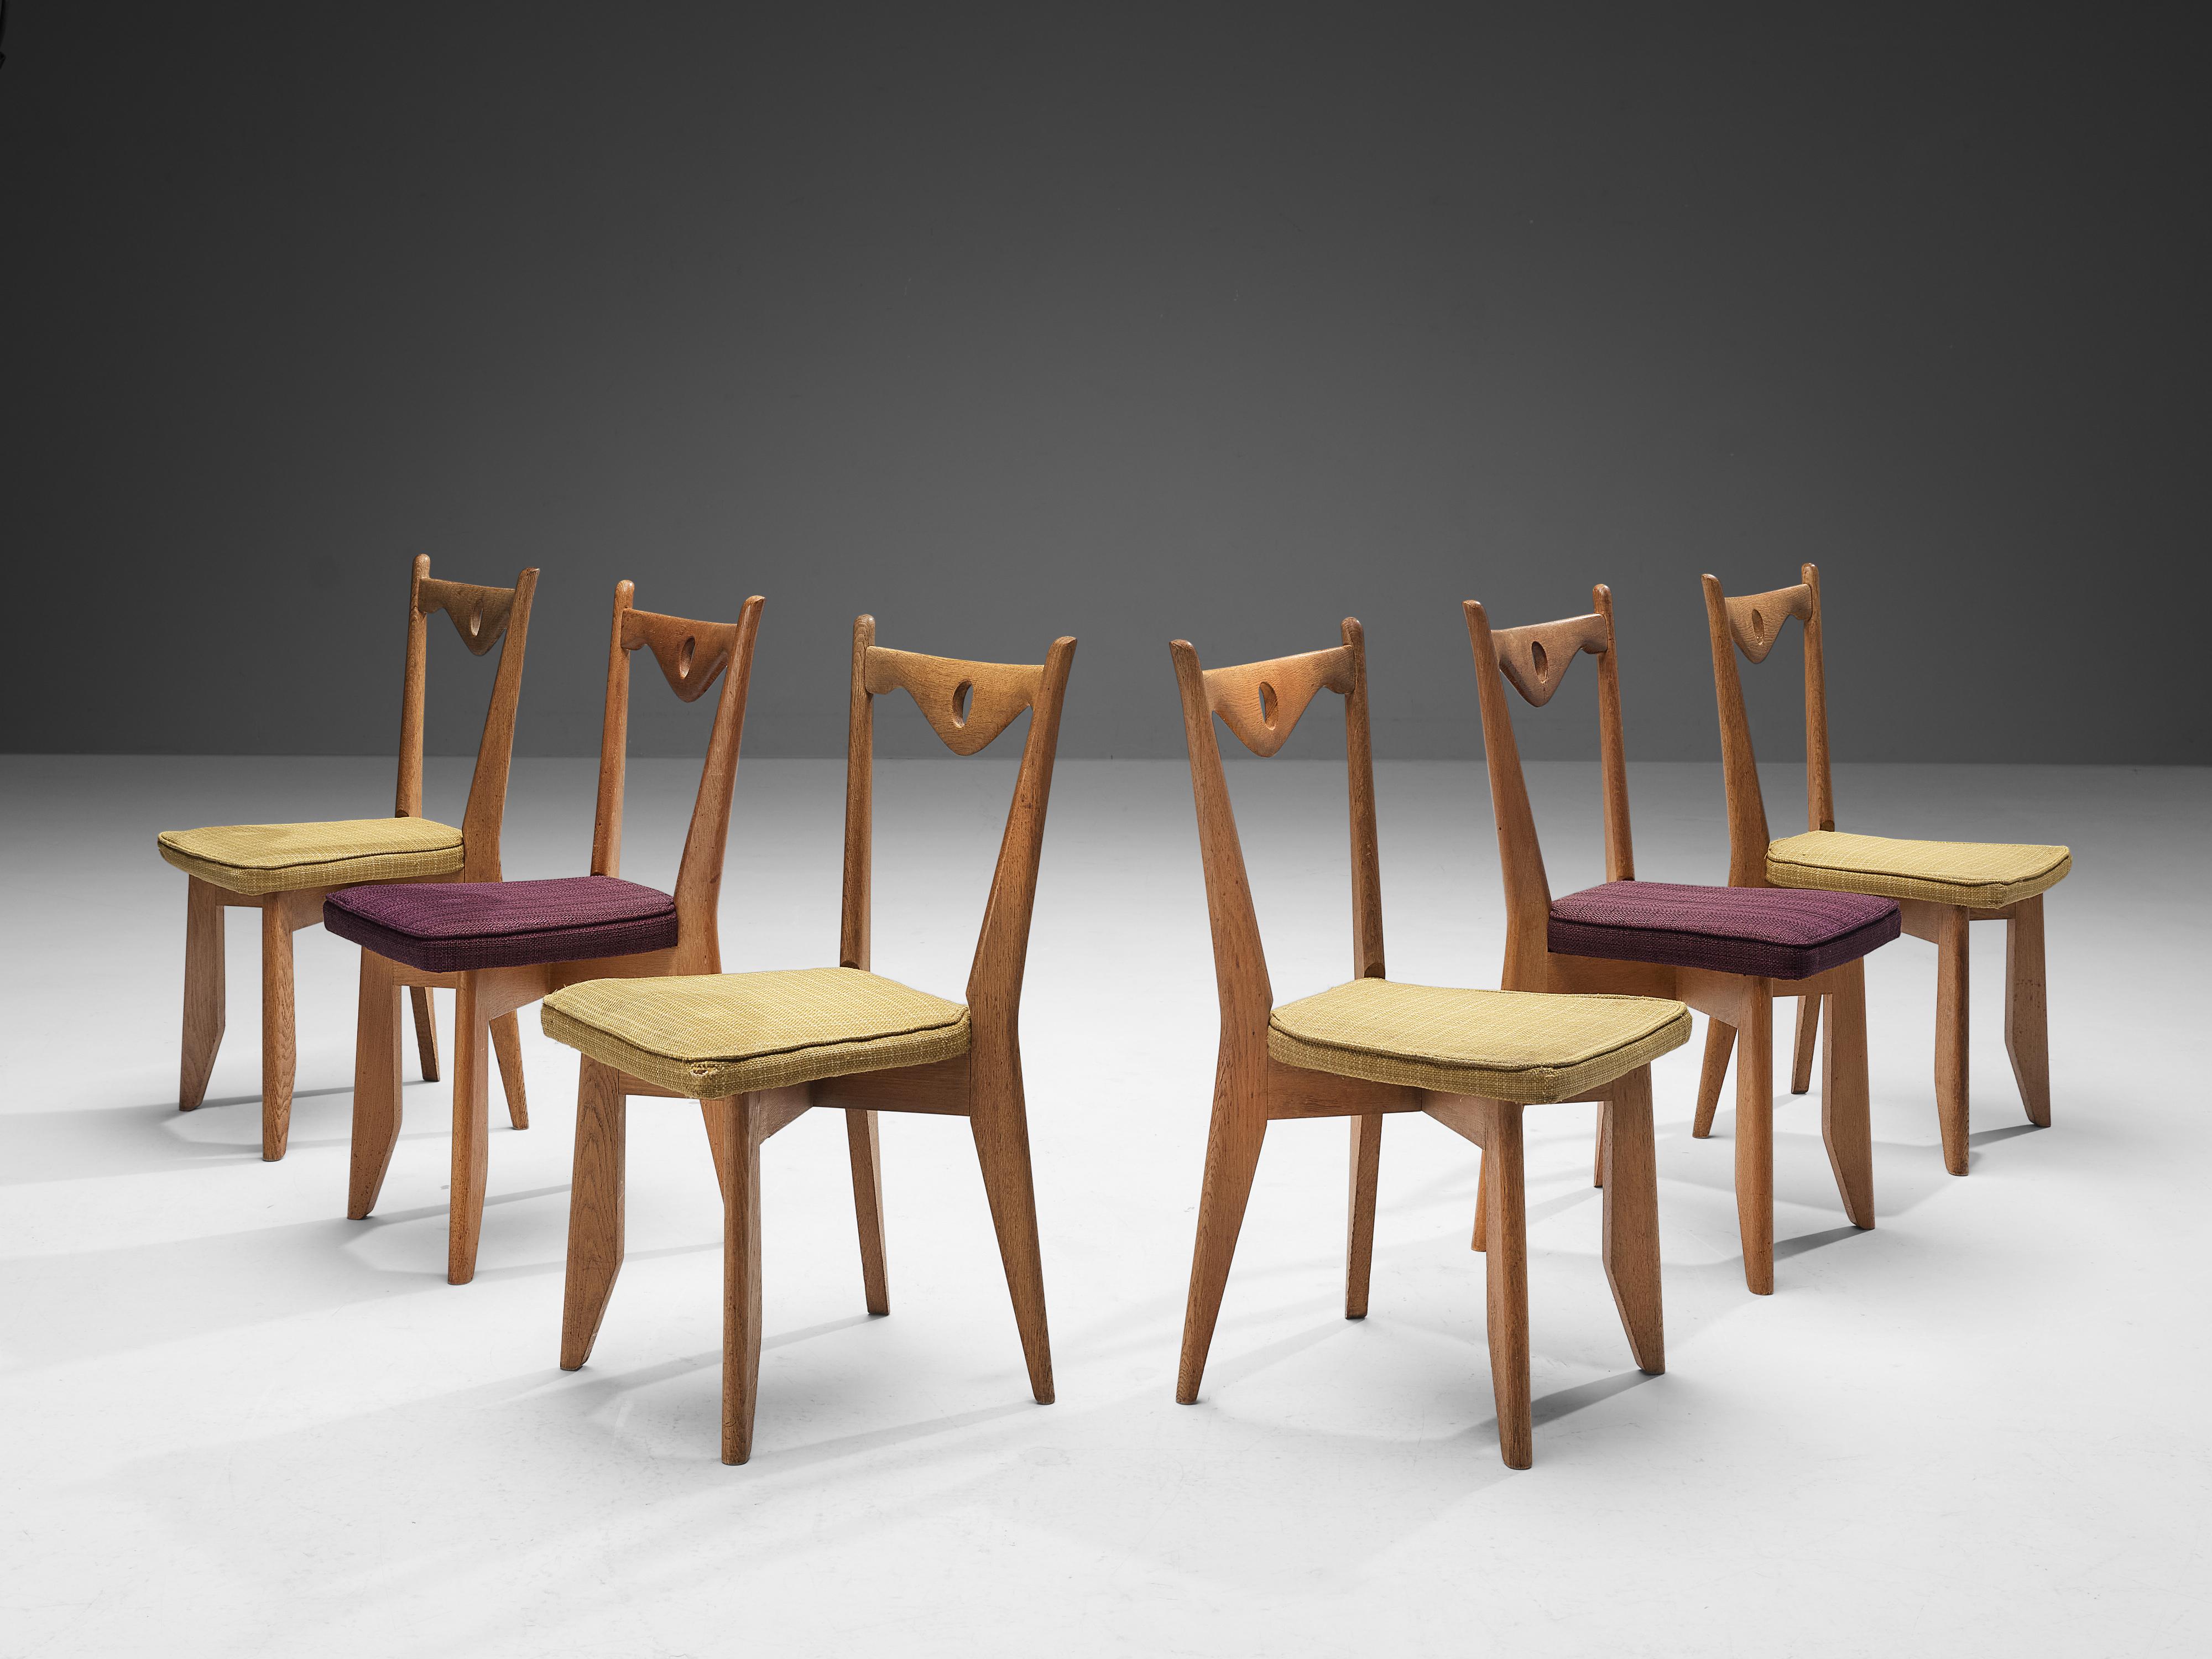 Guillerme et Chambron for Votre Maison, set of six dining chairs, oak, fabric, France, 1960s.

These chairs have characteristic frames with tapered legs and a sculptural back with a downwards facing peak backrest finished with a hole in the